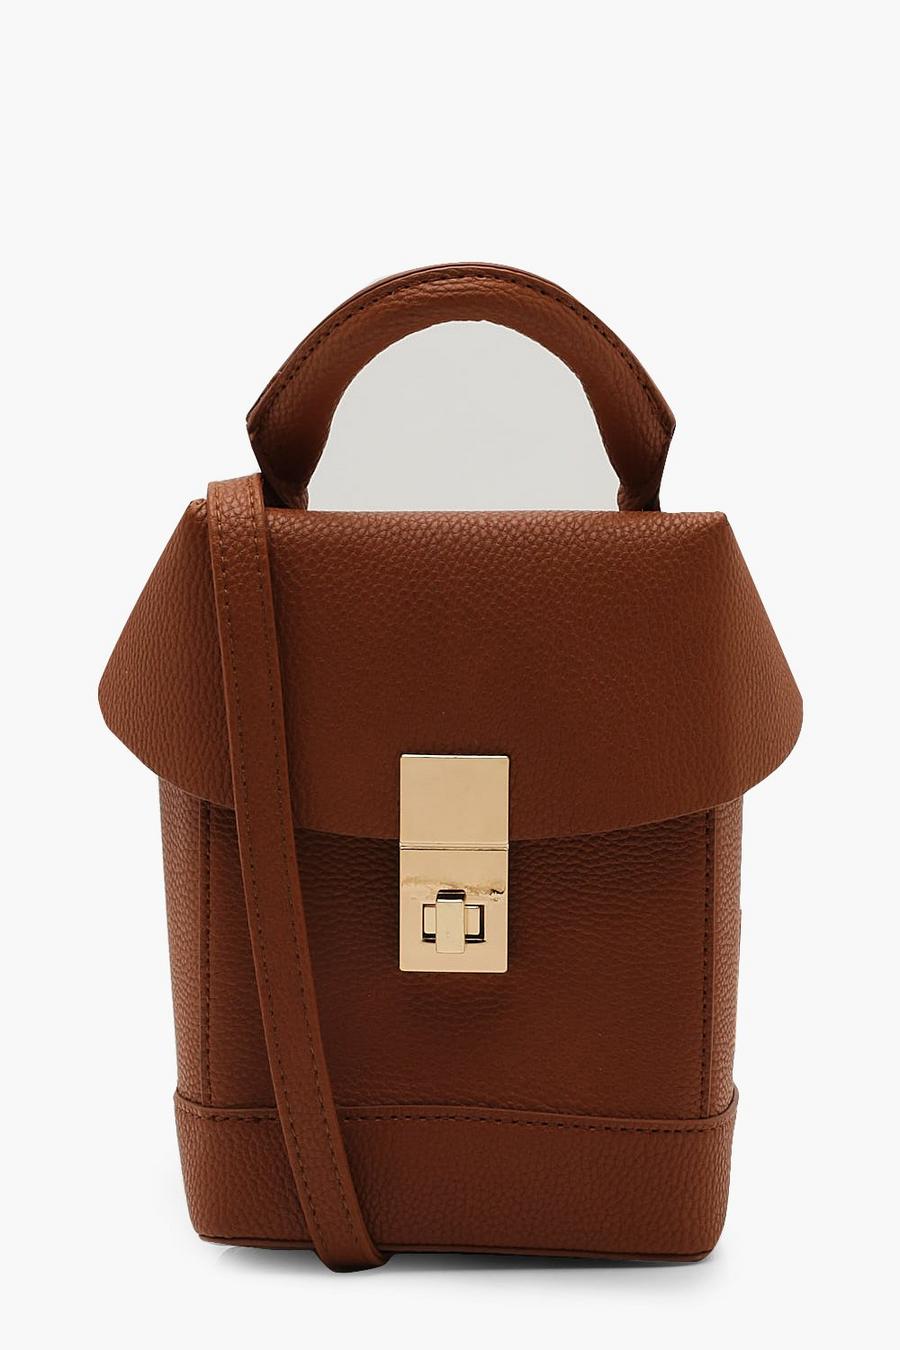 Tan Structured Box Cross Body Bag image number 1